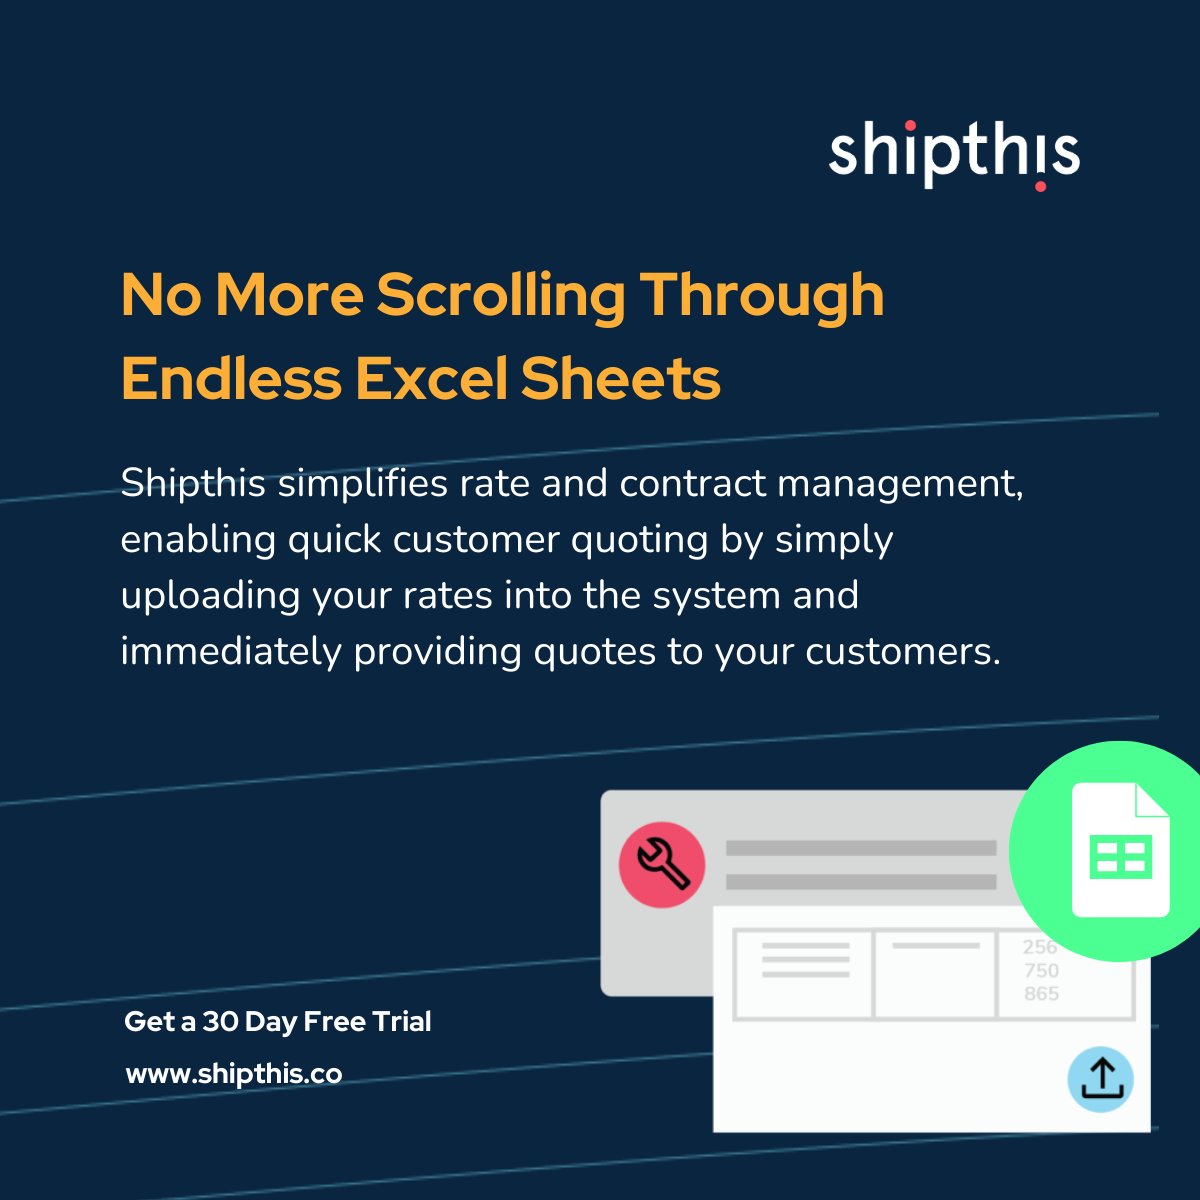 Resolve the complexities of Excel and step into a world where managing rates and contracts is efficient. Shipthis allows you to effortlessly upload all your rates, ensuring quick and precise quotations for your customers. #Shipthis #LogisticsRevolution #EffortlessManagement